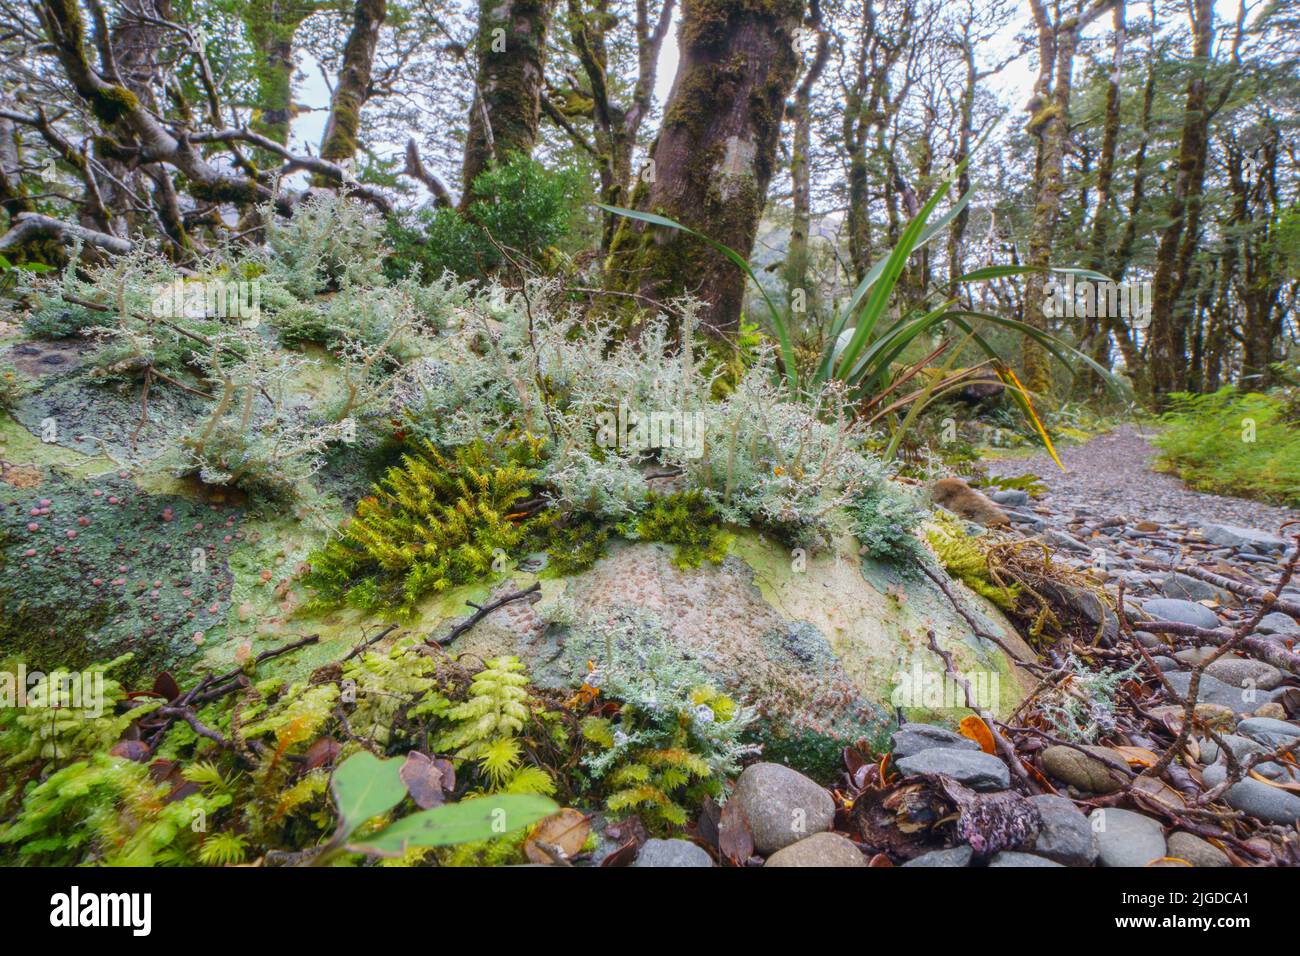 Amazing selection small plants and mosses in Micro-landscape on Southern Alps rainforest floor Stock Photo